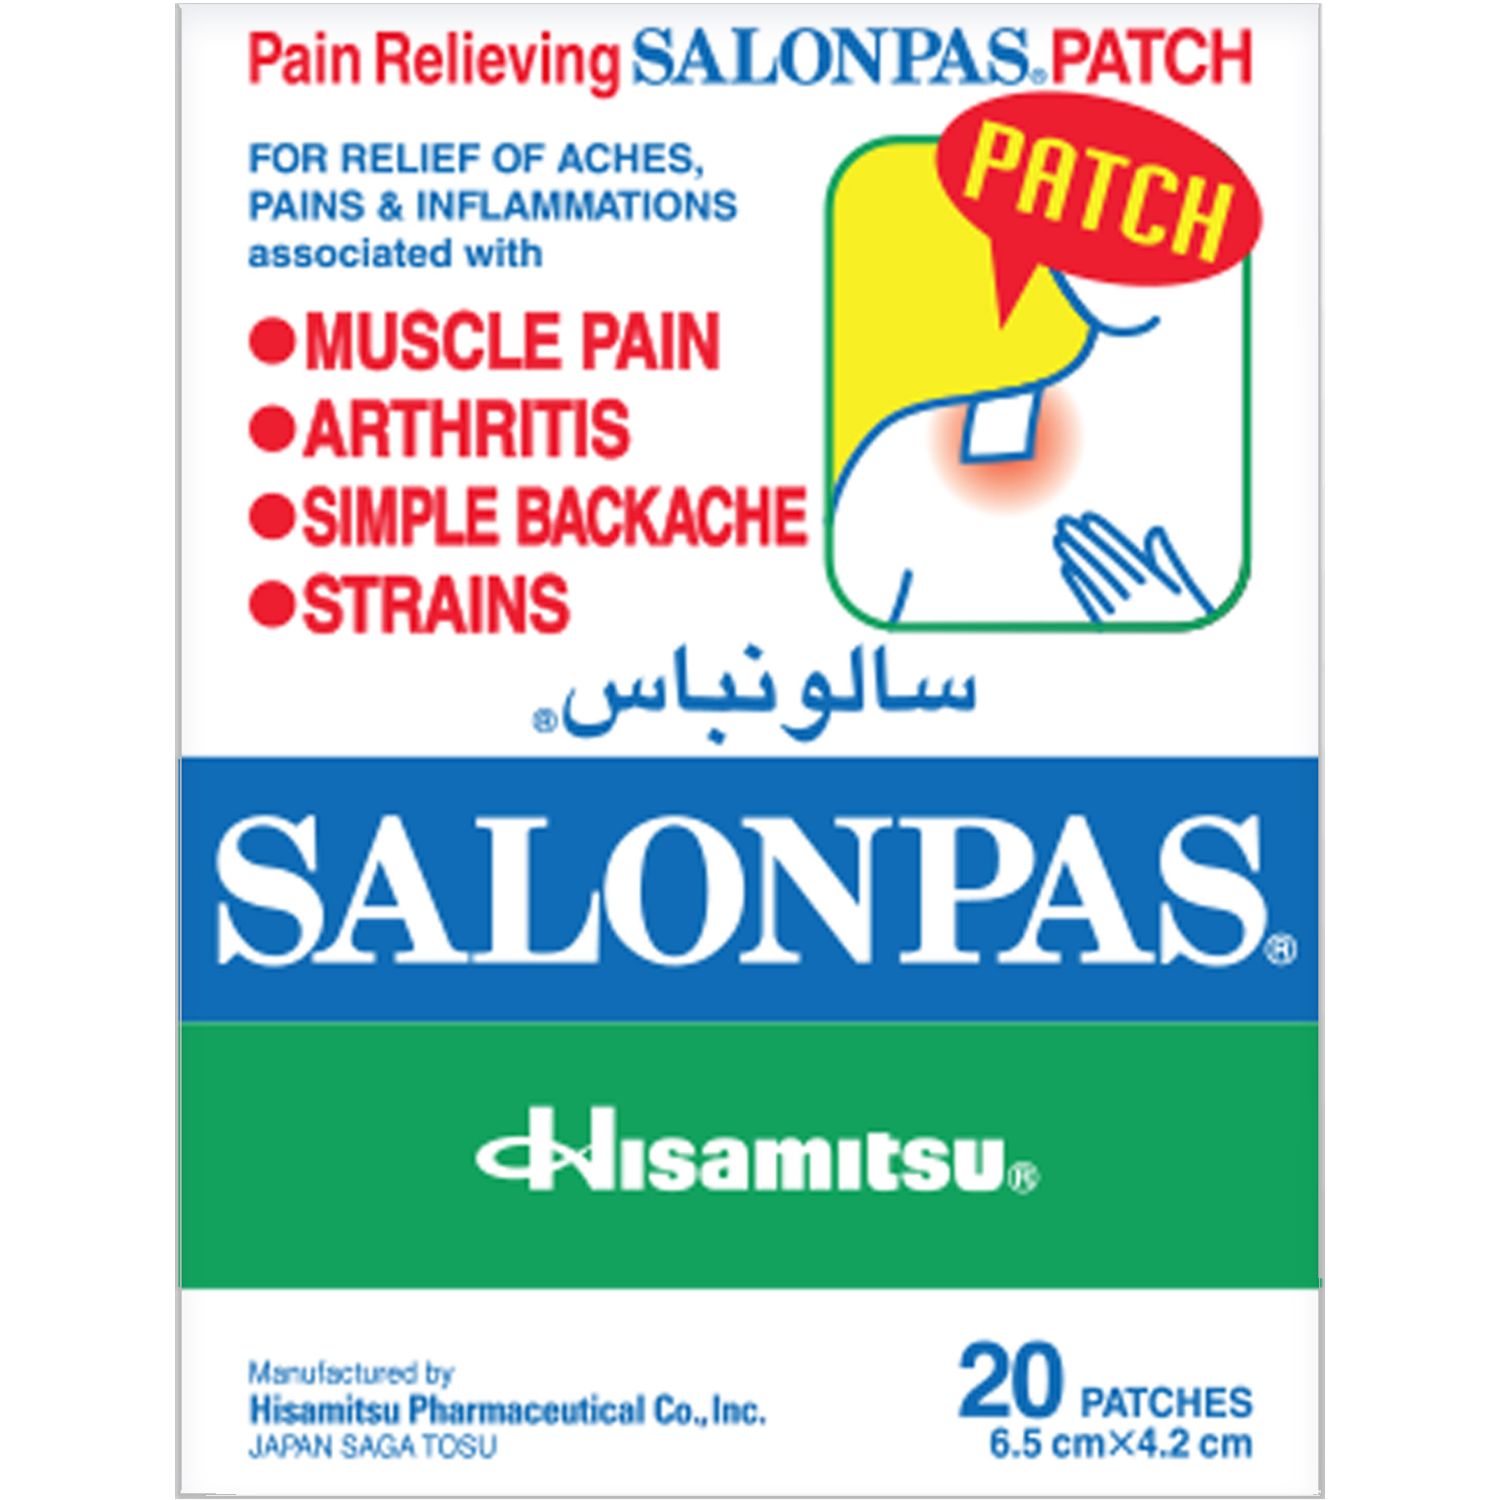 Product Image for Salonpas Patch 20's